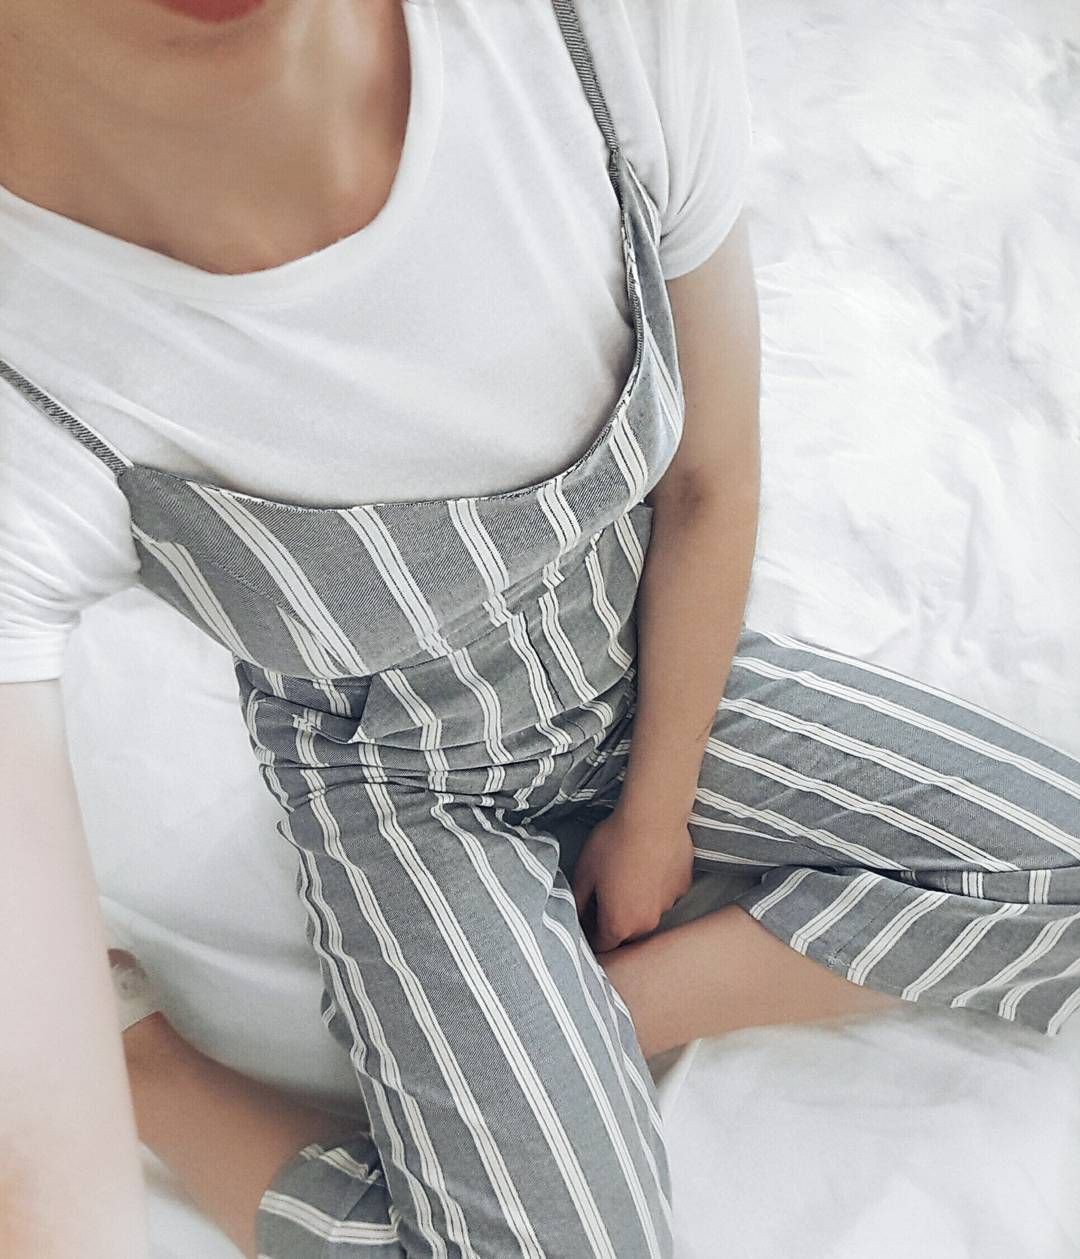 Jumpsuit outfit white shirt, Crop top: Crop top,  Pant Outfits  